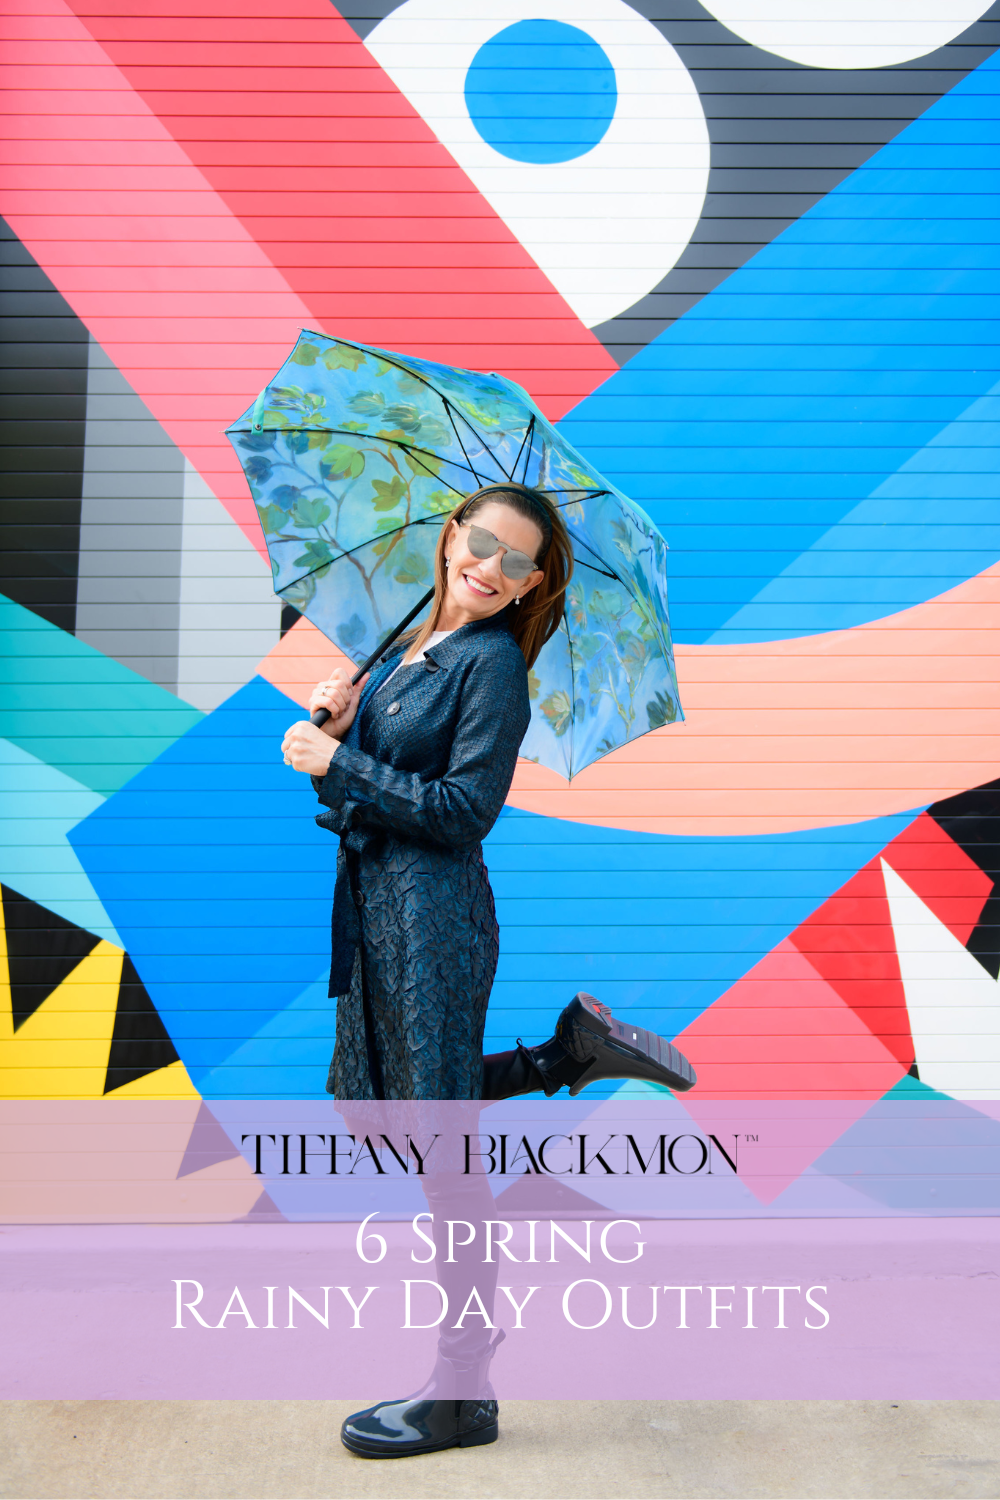 6 Spring Rainy Day Outfits

pin for later, save for later, spring, spring style, spring fashion, spring outfits, rainy day, rain coat, rain jacket, rain boots